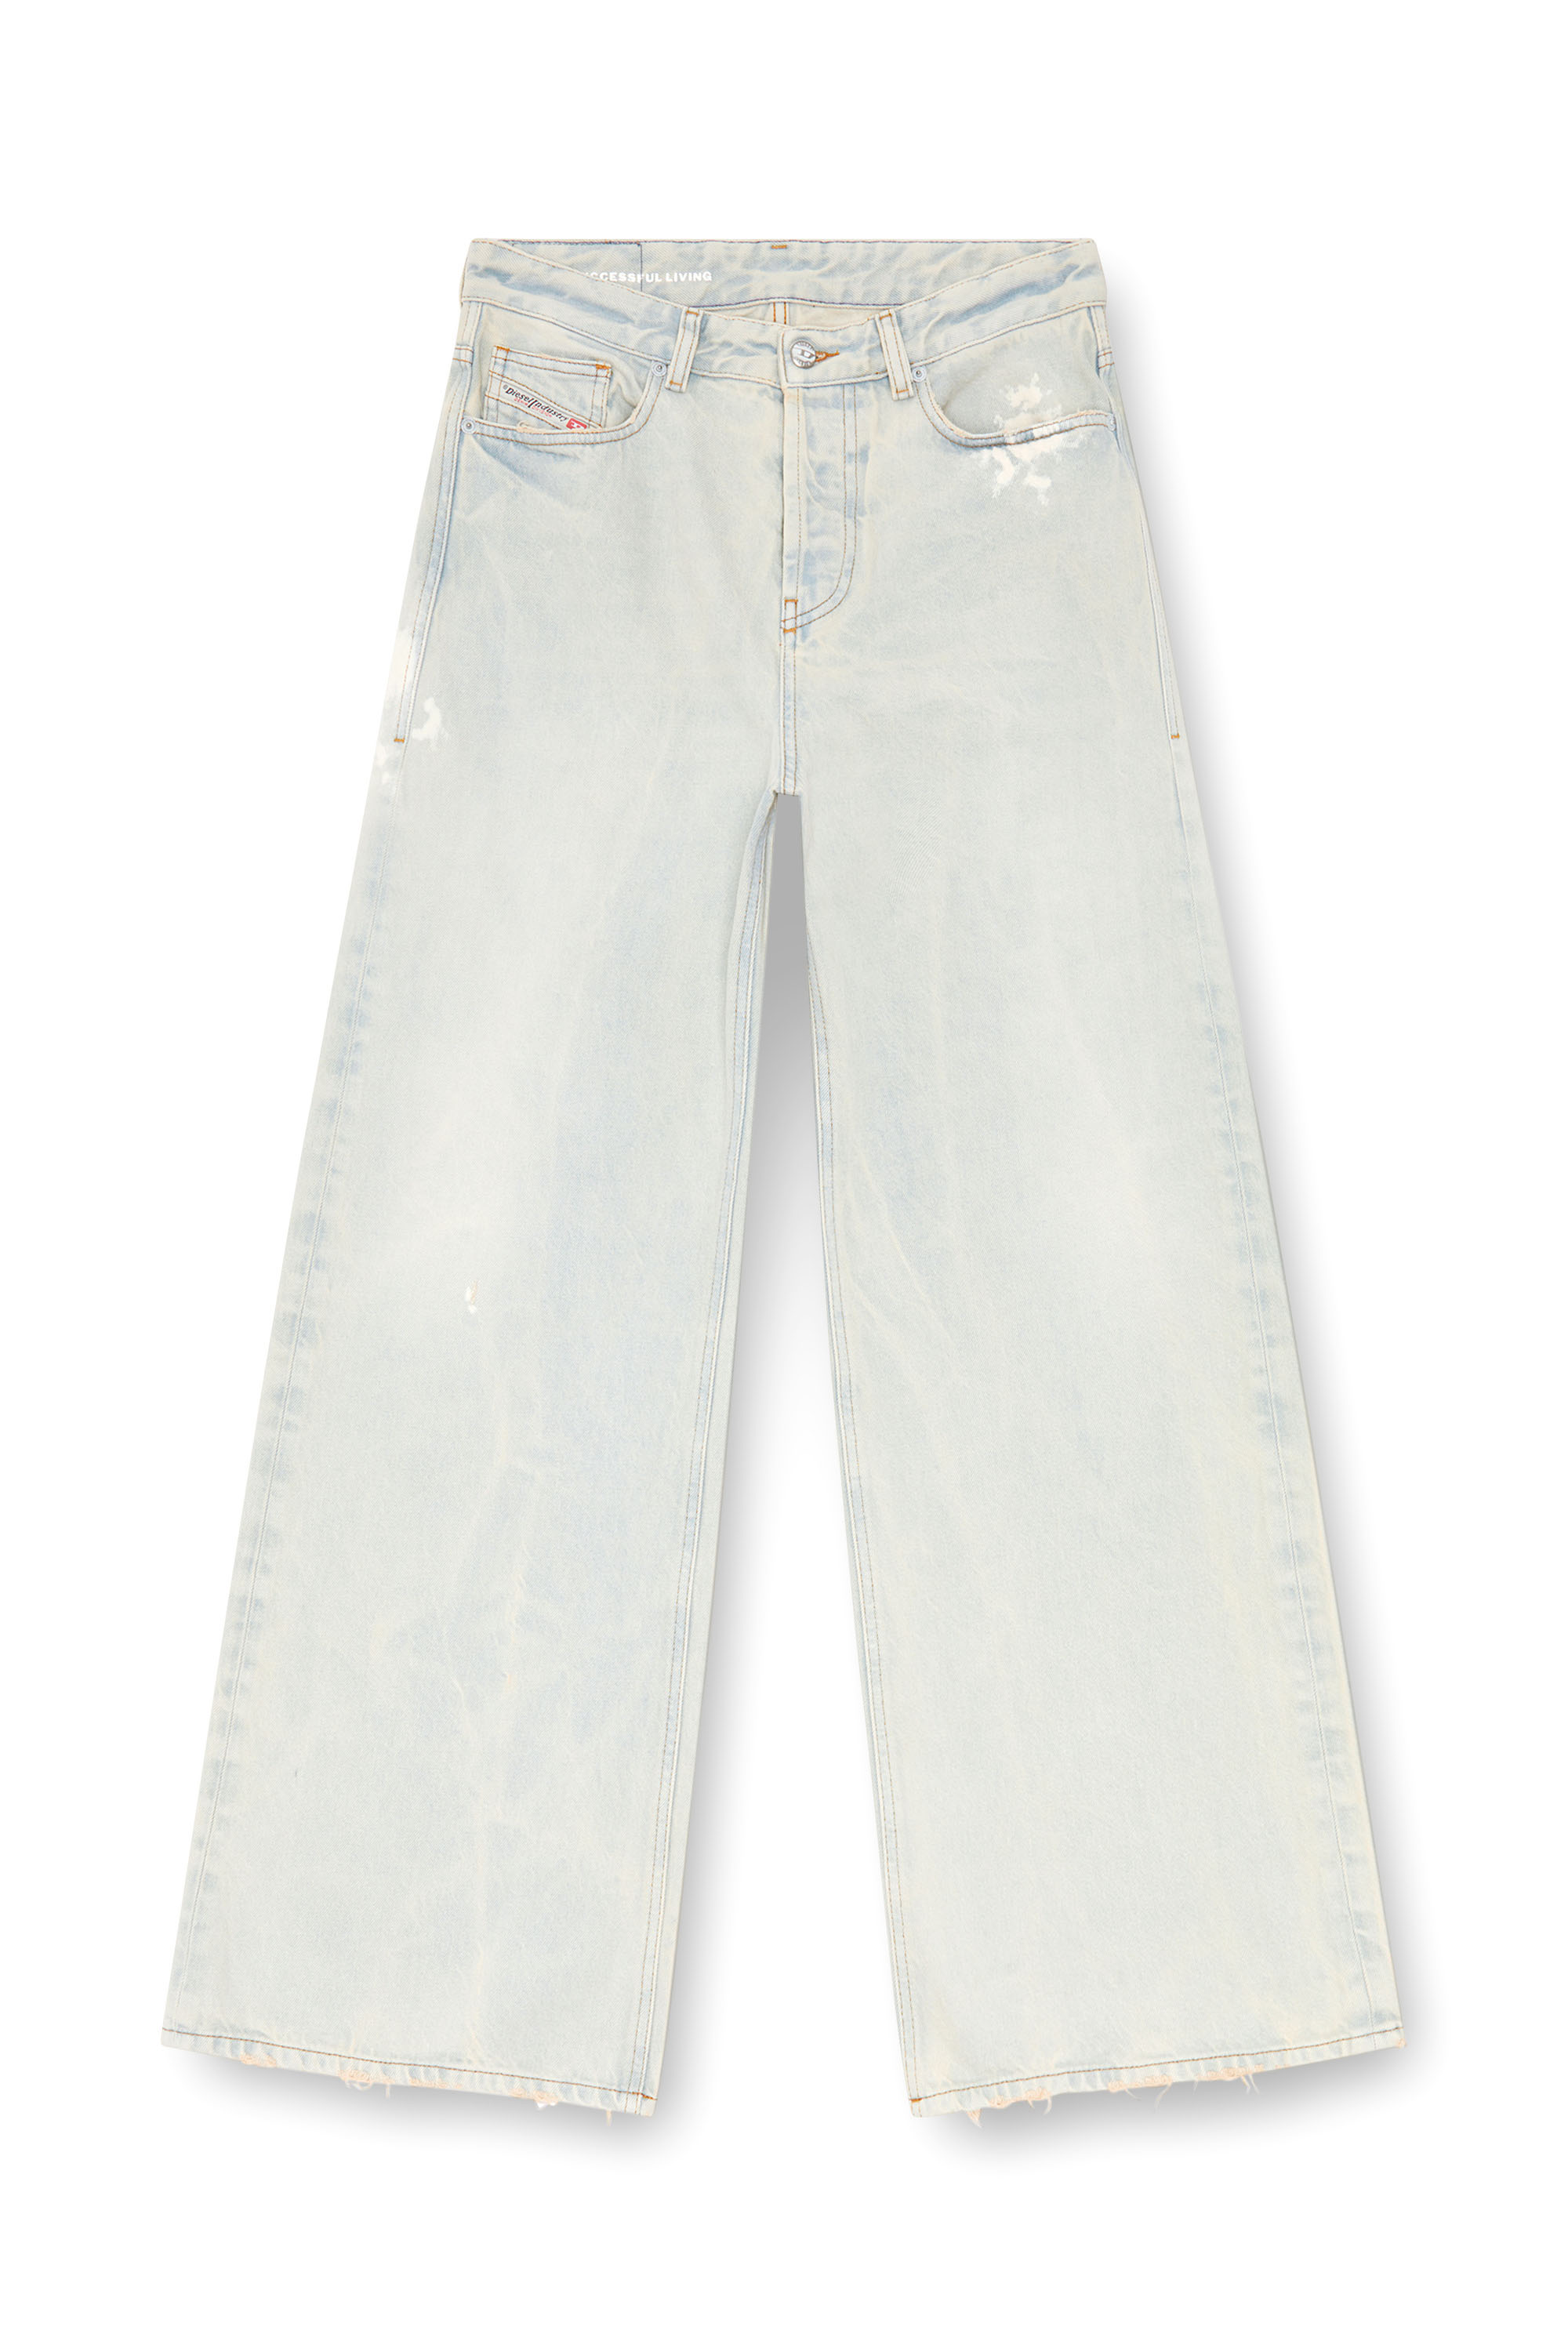 Diesel - Straight Jeans 1996 D-Sire 09J81, Mujer Straight Jeans - 1996 D-Sire in Azul marino - Image 5